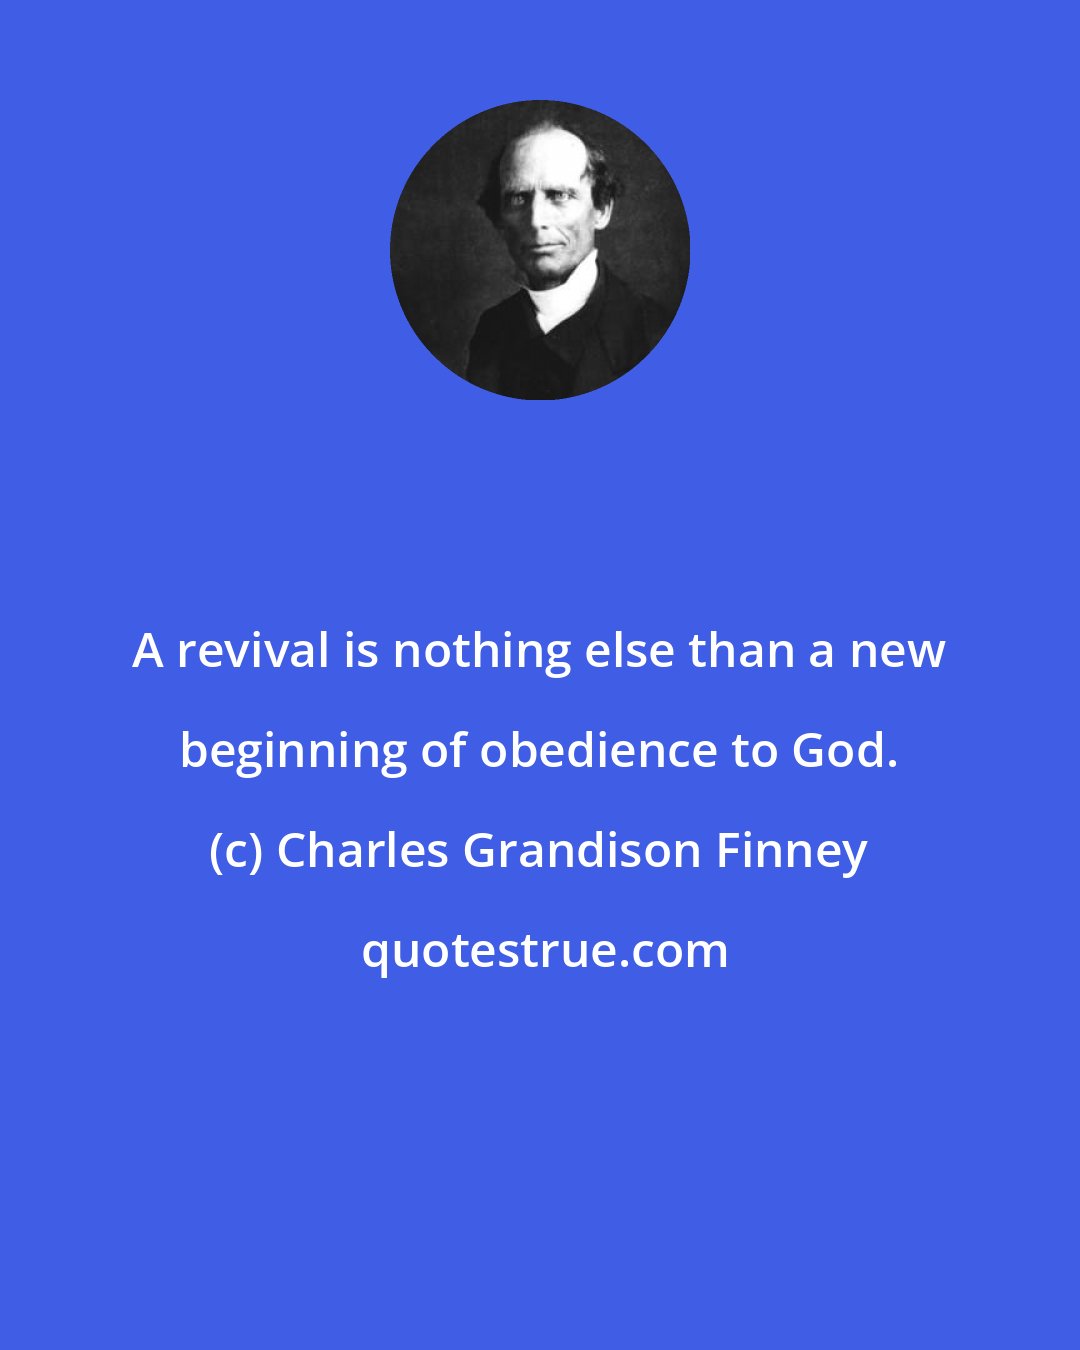 Charles Grandison Finney: A revival is nothing else than a new beginning of obedience to God.